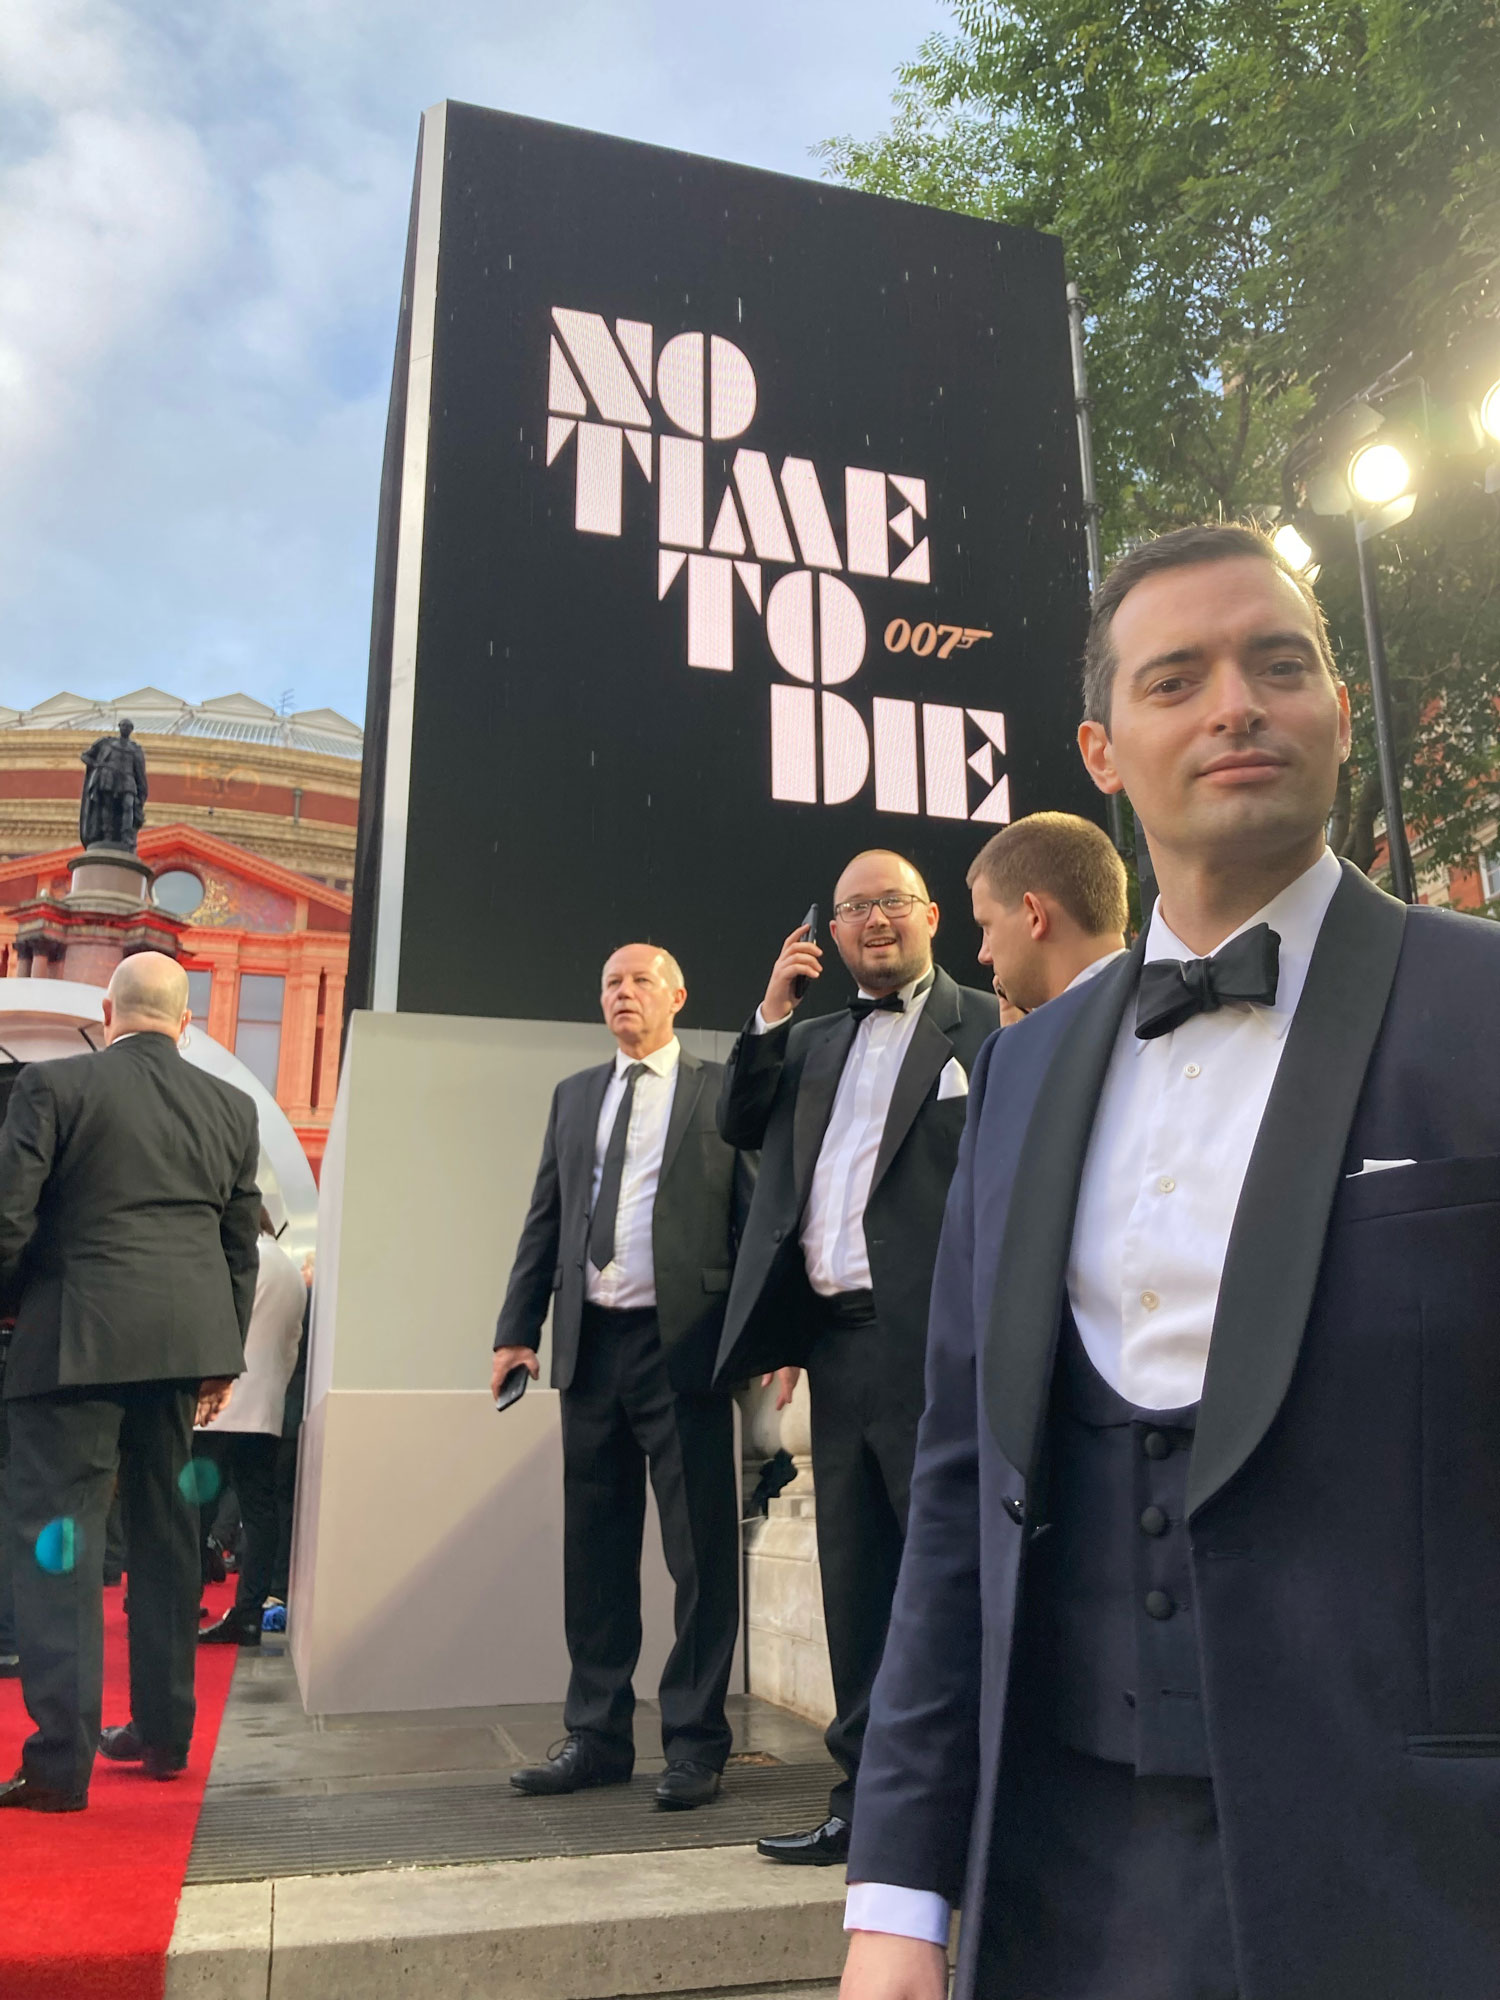 Tom Ford Dresses 007 In No Time To Die